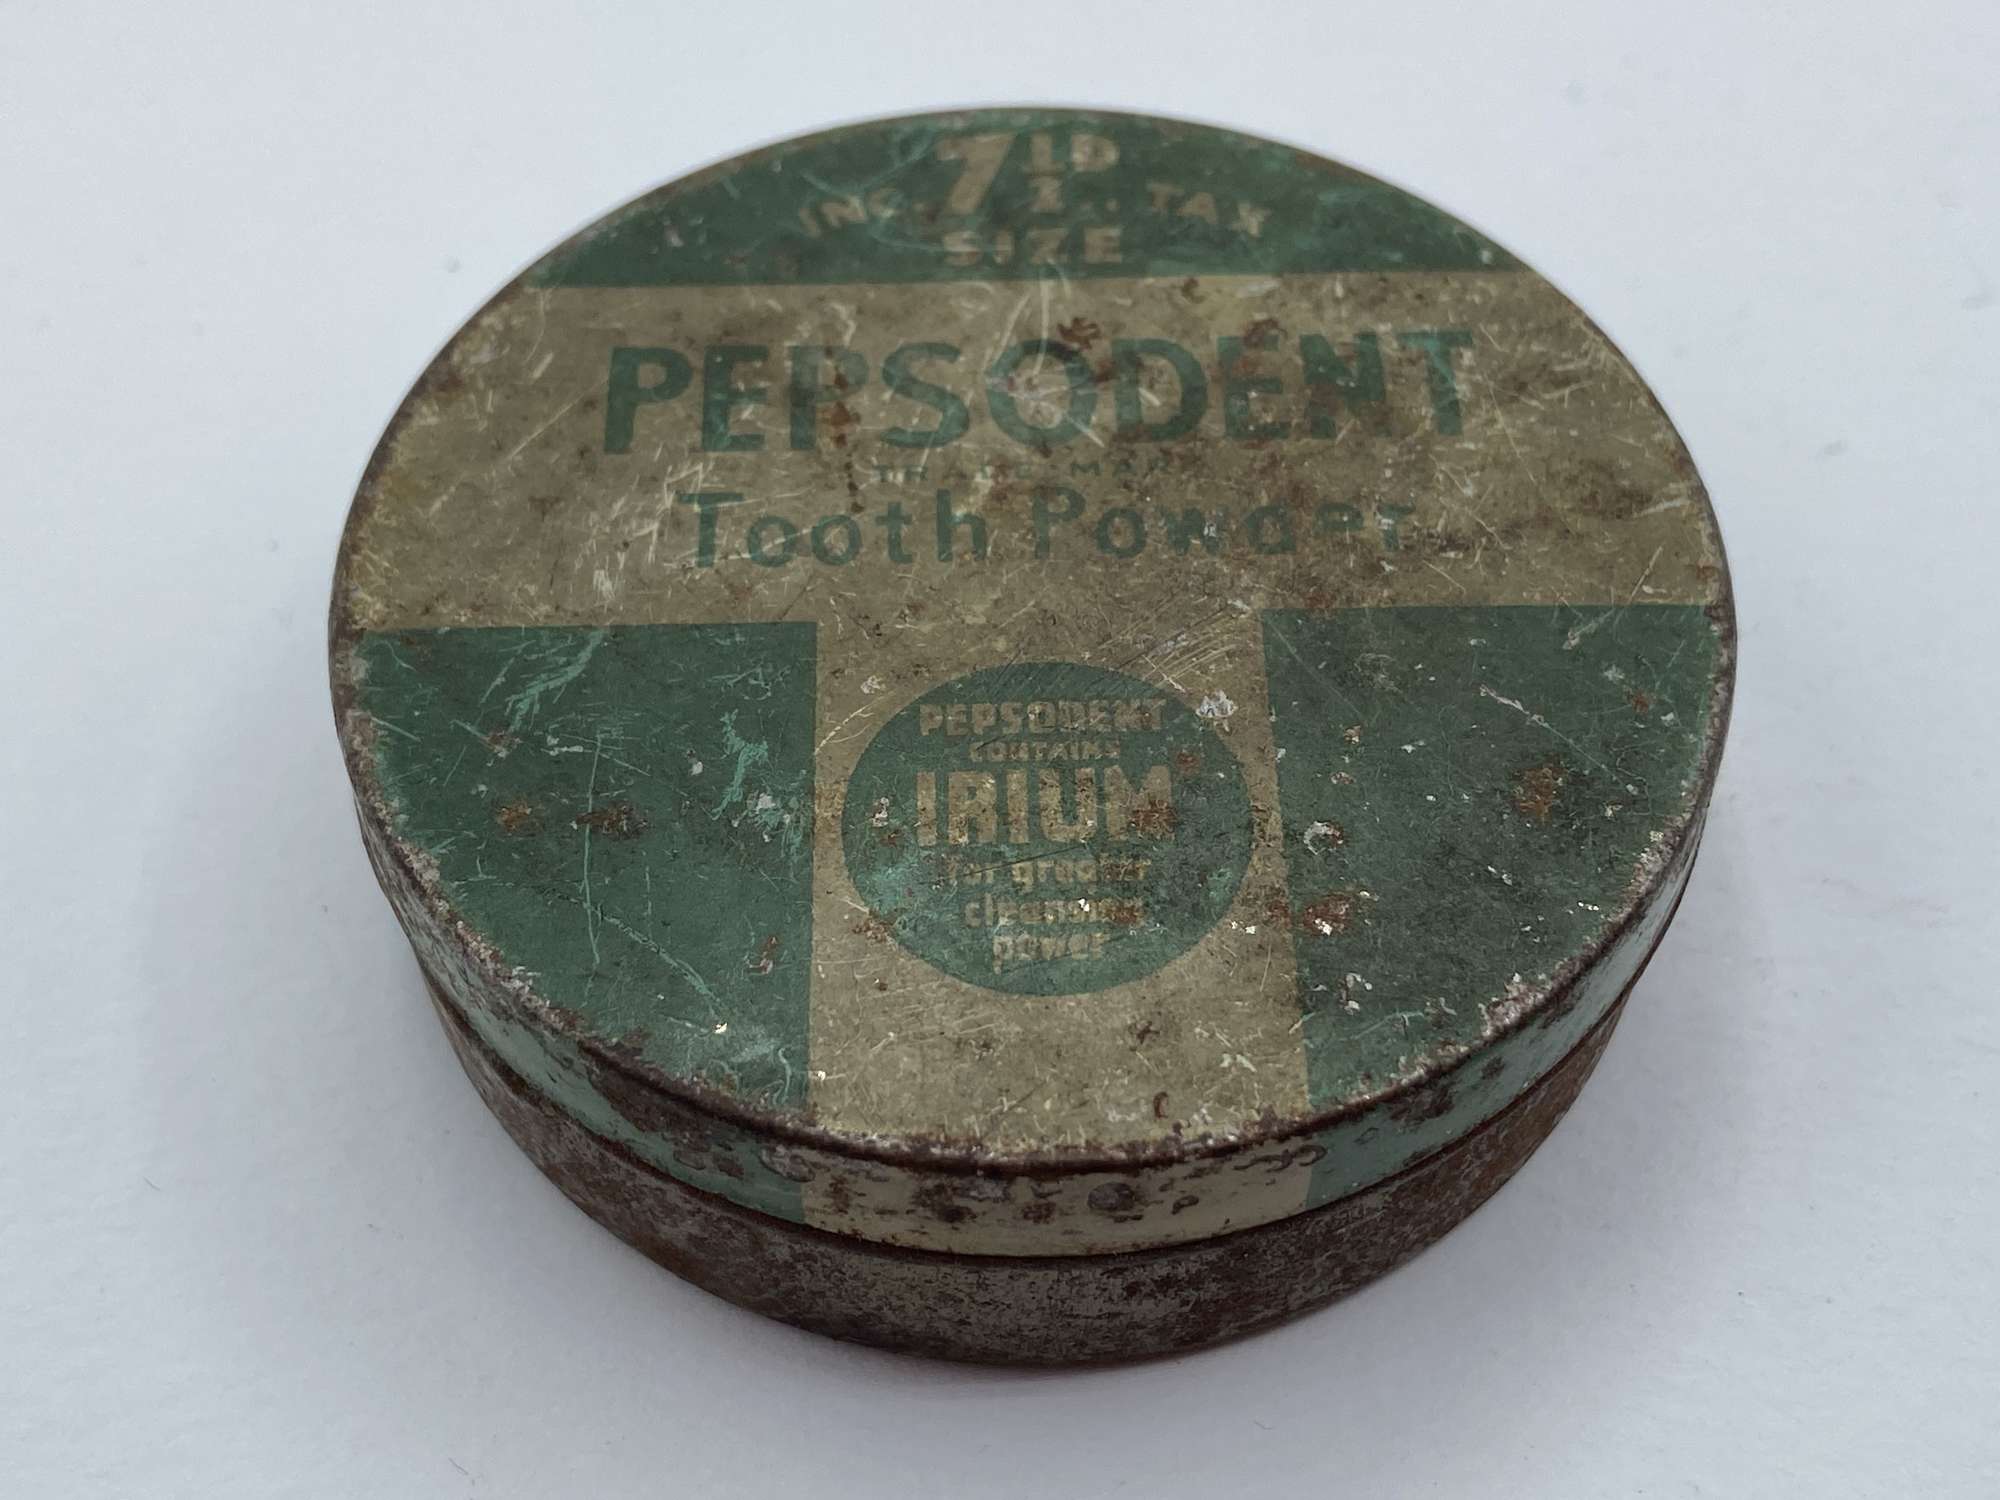 WW2 Period British Pharmaceutical Home Front Pepsodent Tooth Powder